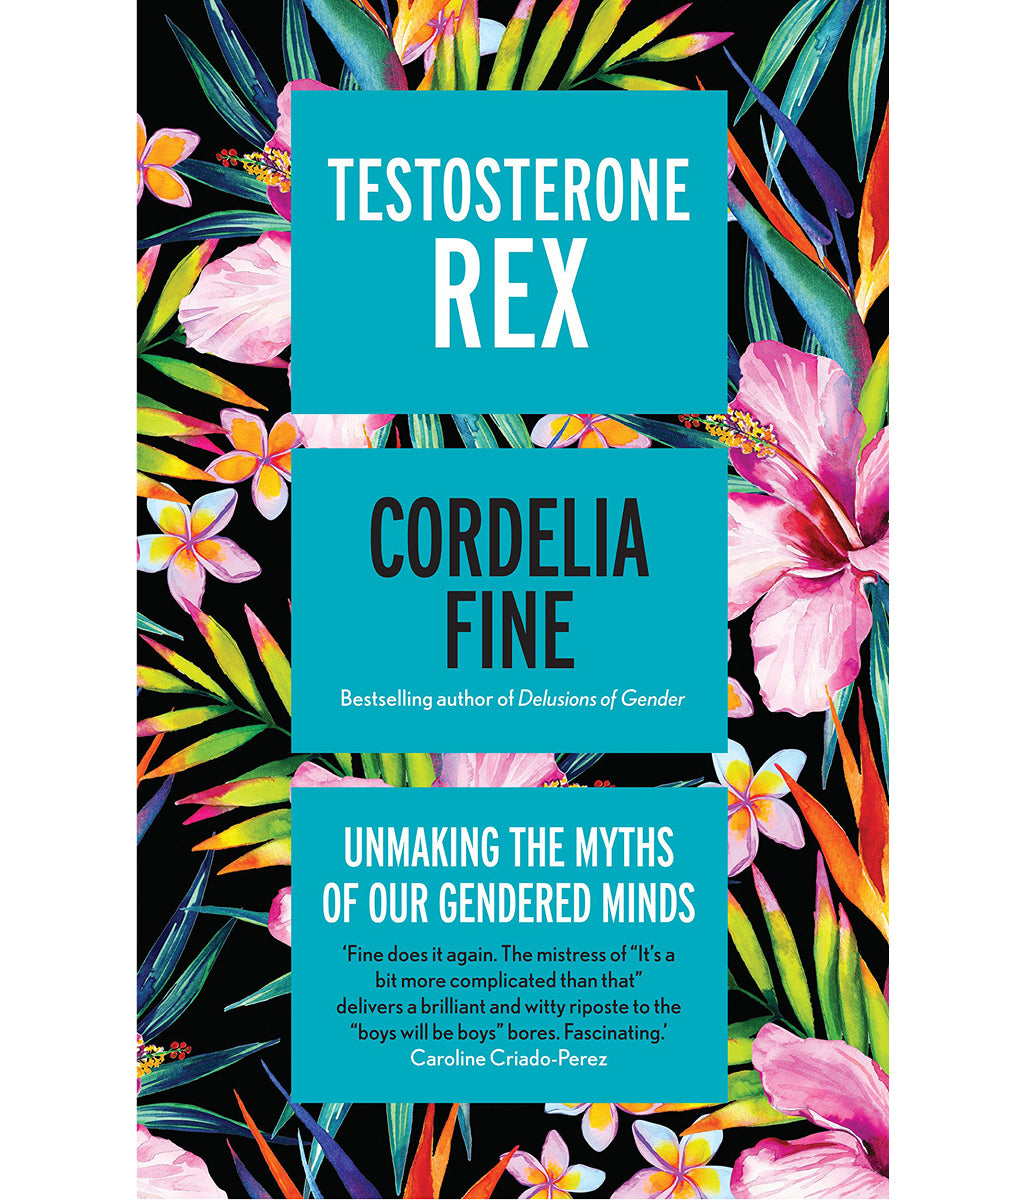 Testosterone Rex: Unmaking the Myths of our Gendered Minds Coredlia Fine